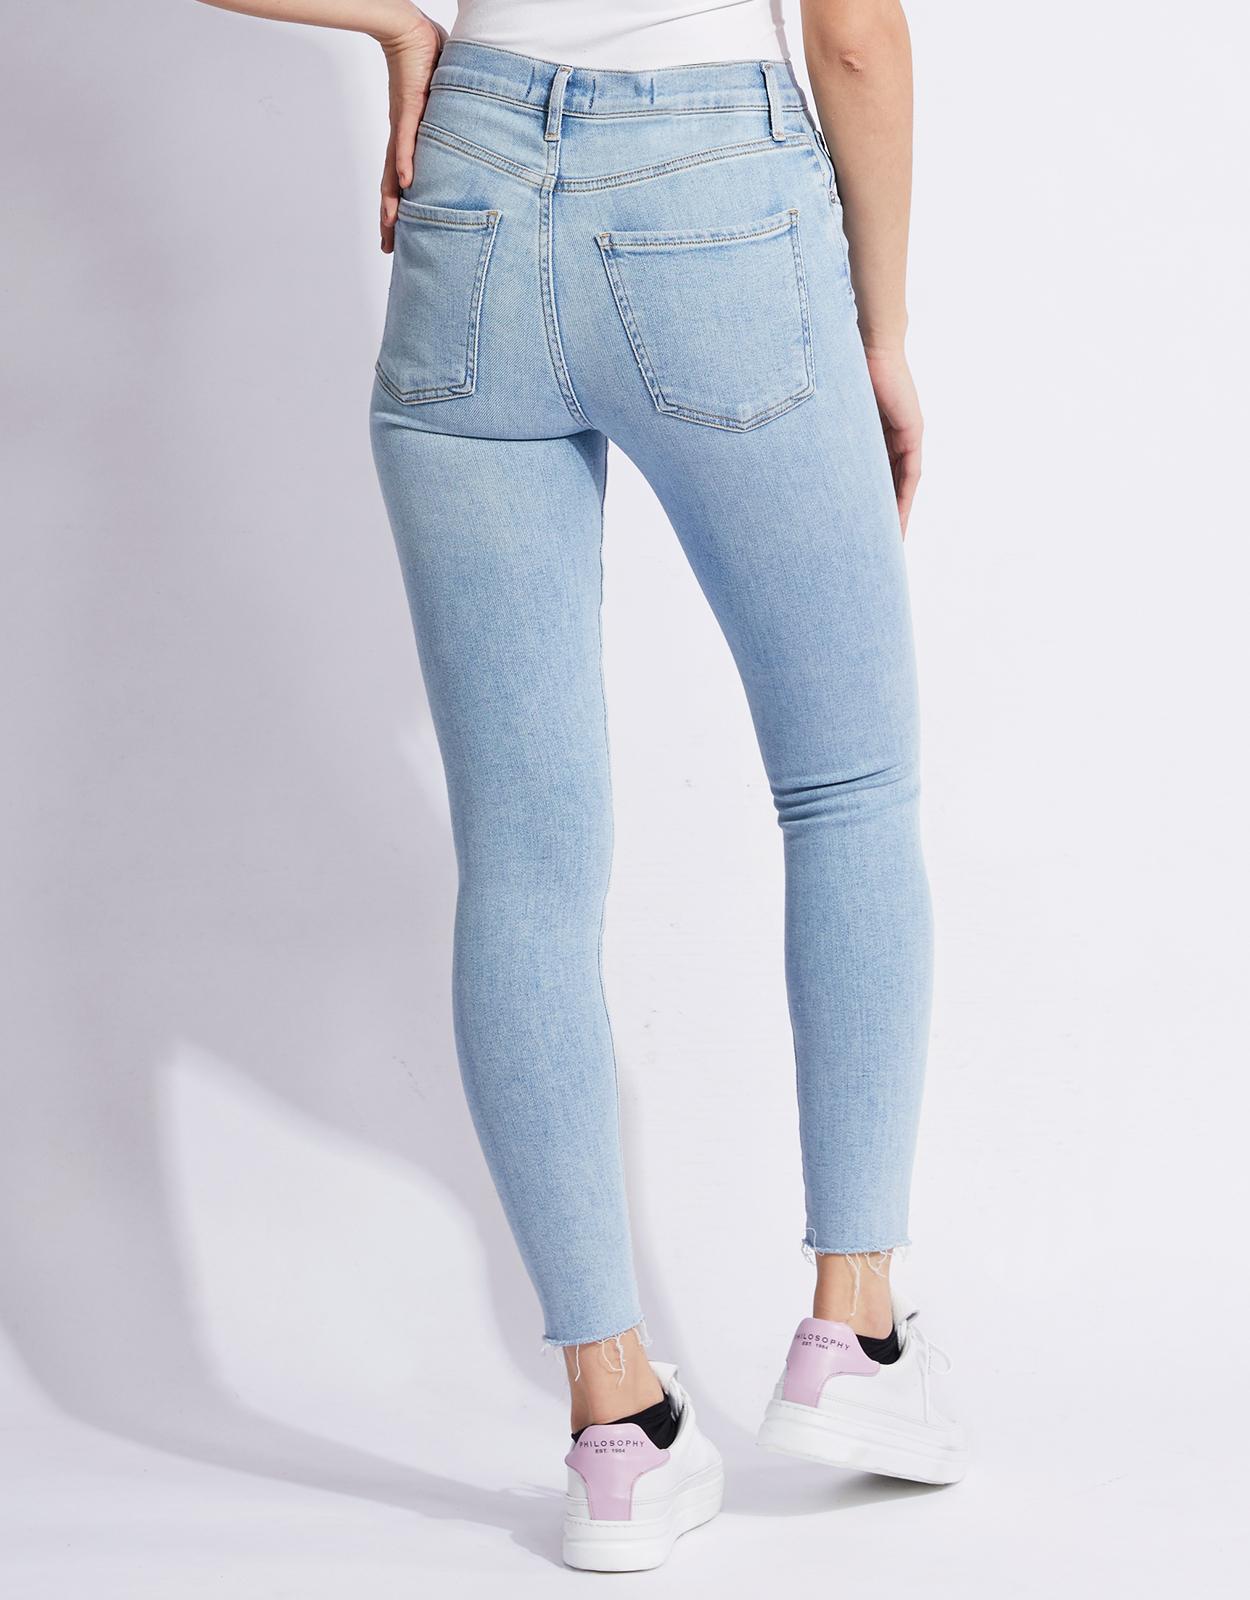 Agolde Denim Sophie Mid-rise Skinny Ankle Jeans in Blue - Lyst